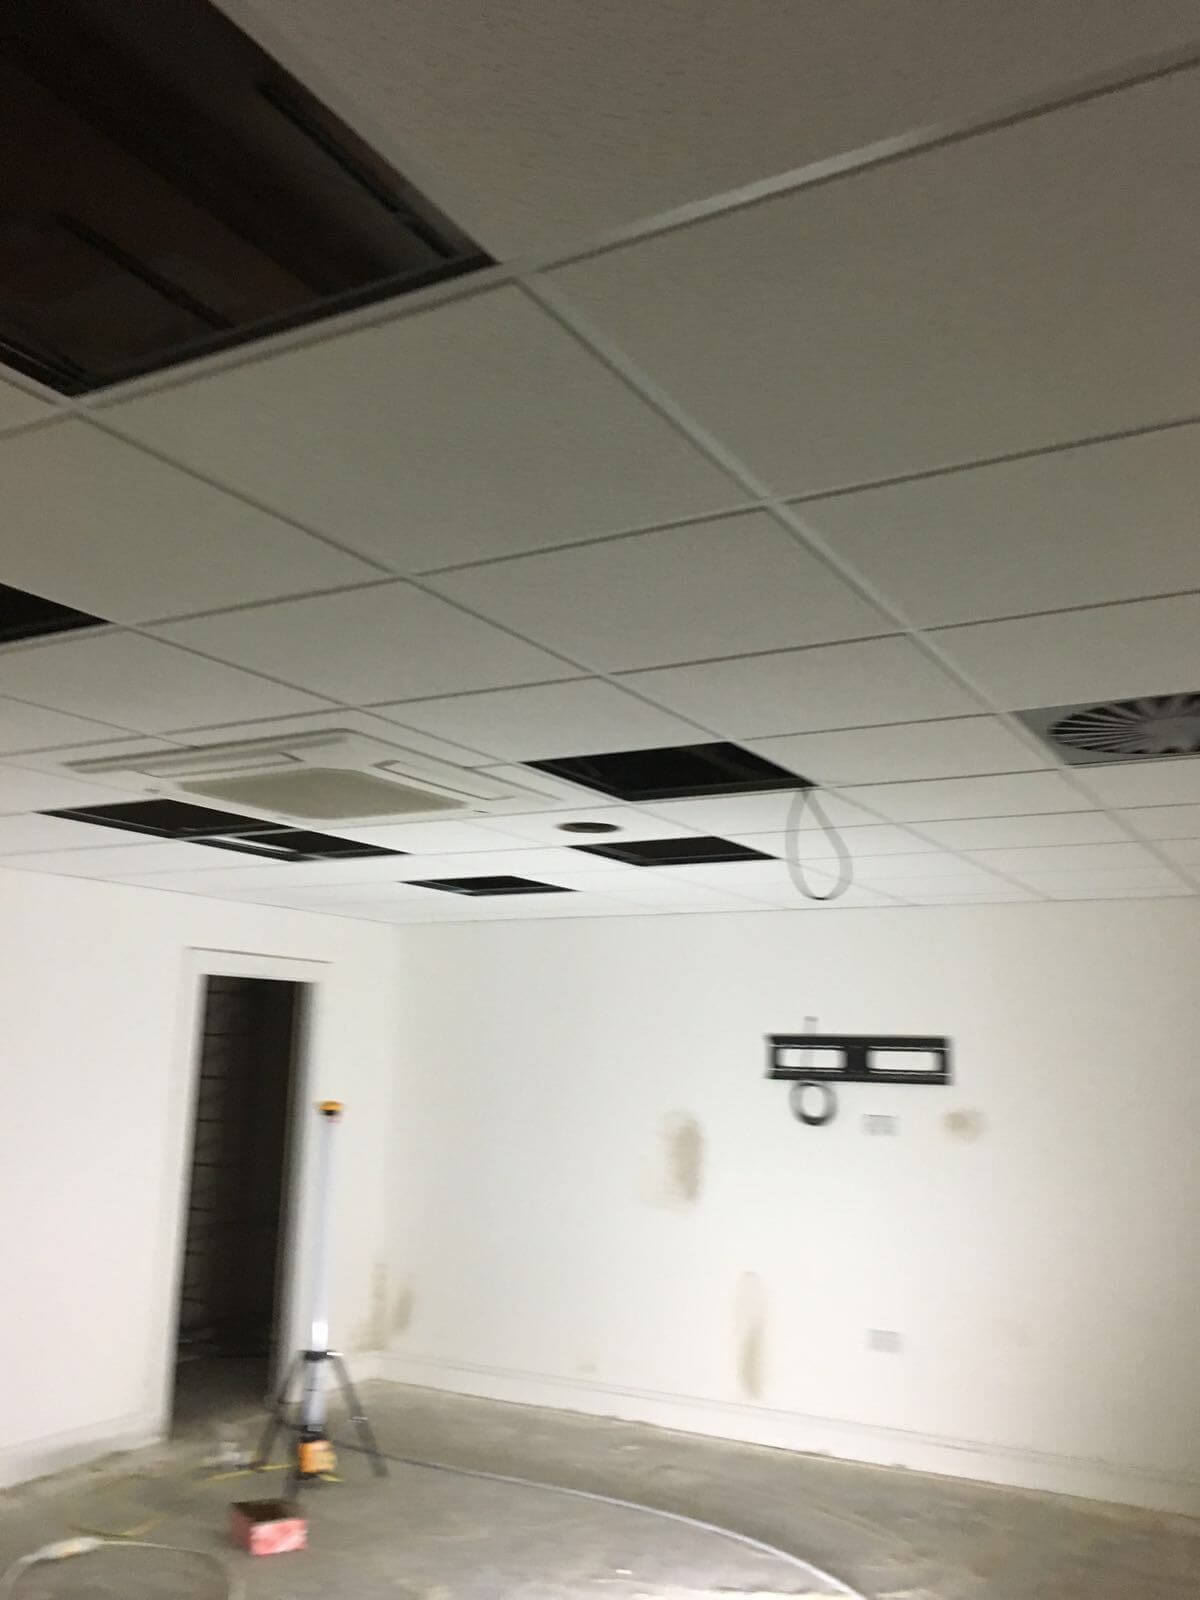 Ceilings and Track Re-coating Luton, Bedfordshire